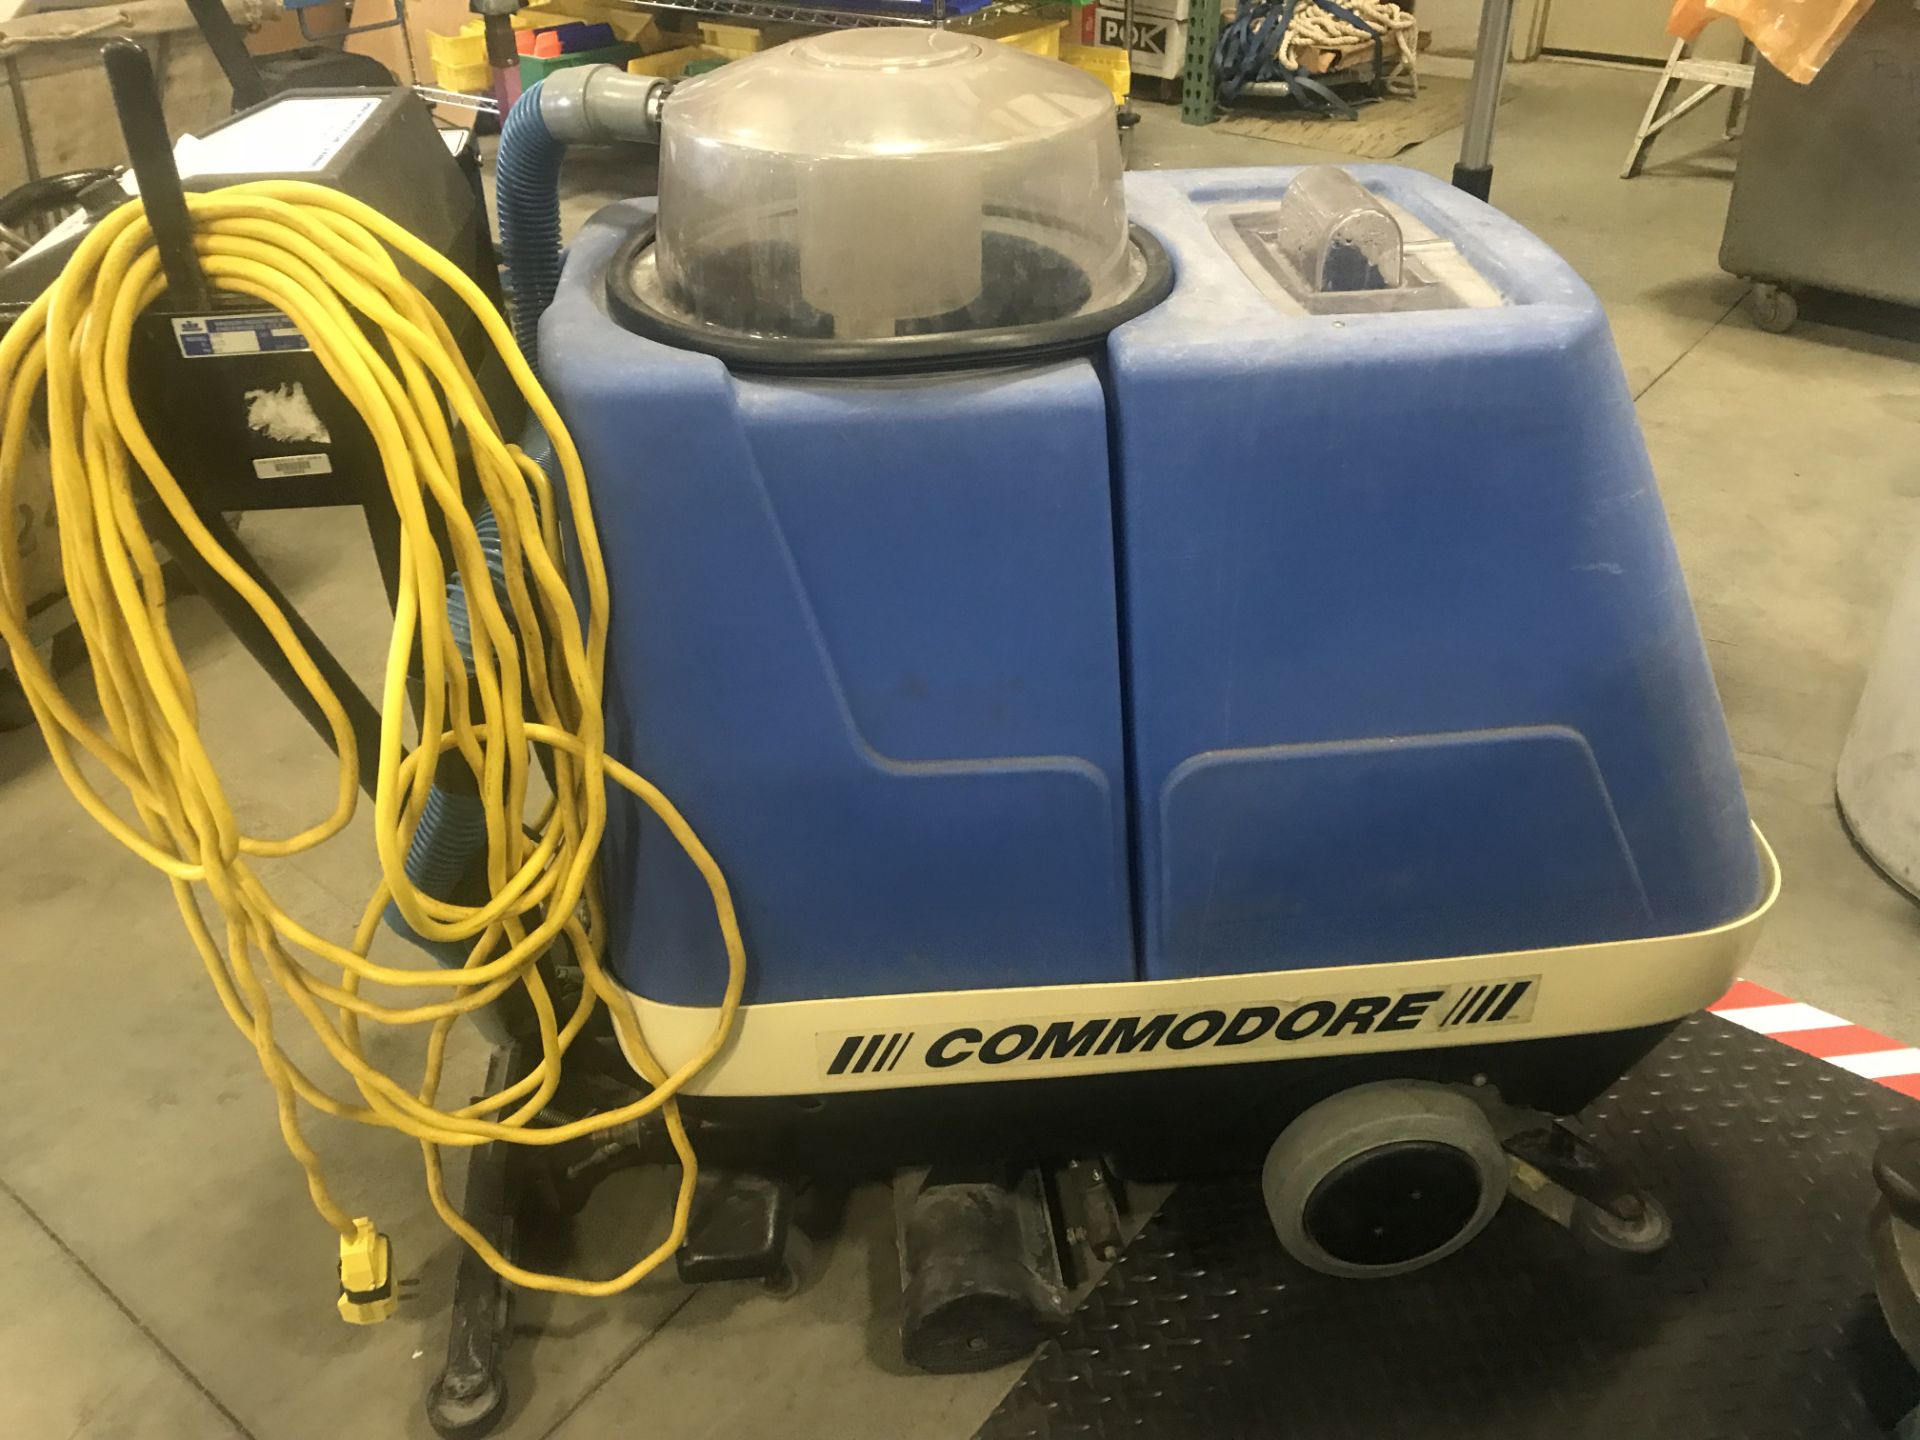 WINDSOR COMMODORE CARPET EXTRACTOR MOD. CMD, 244 HRS SHOWING